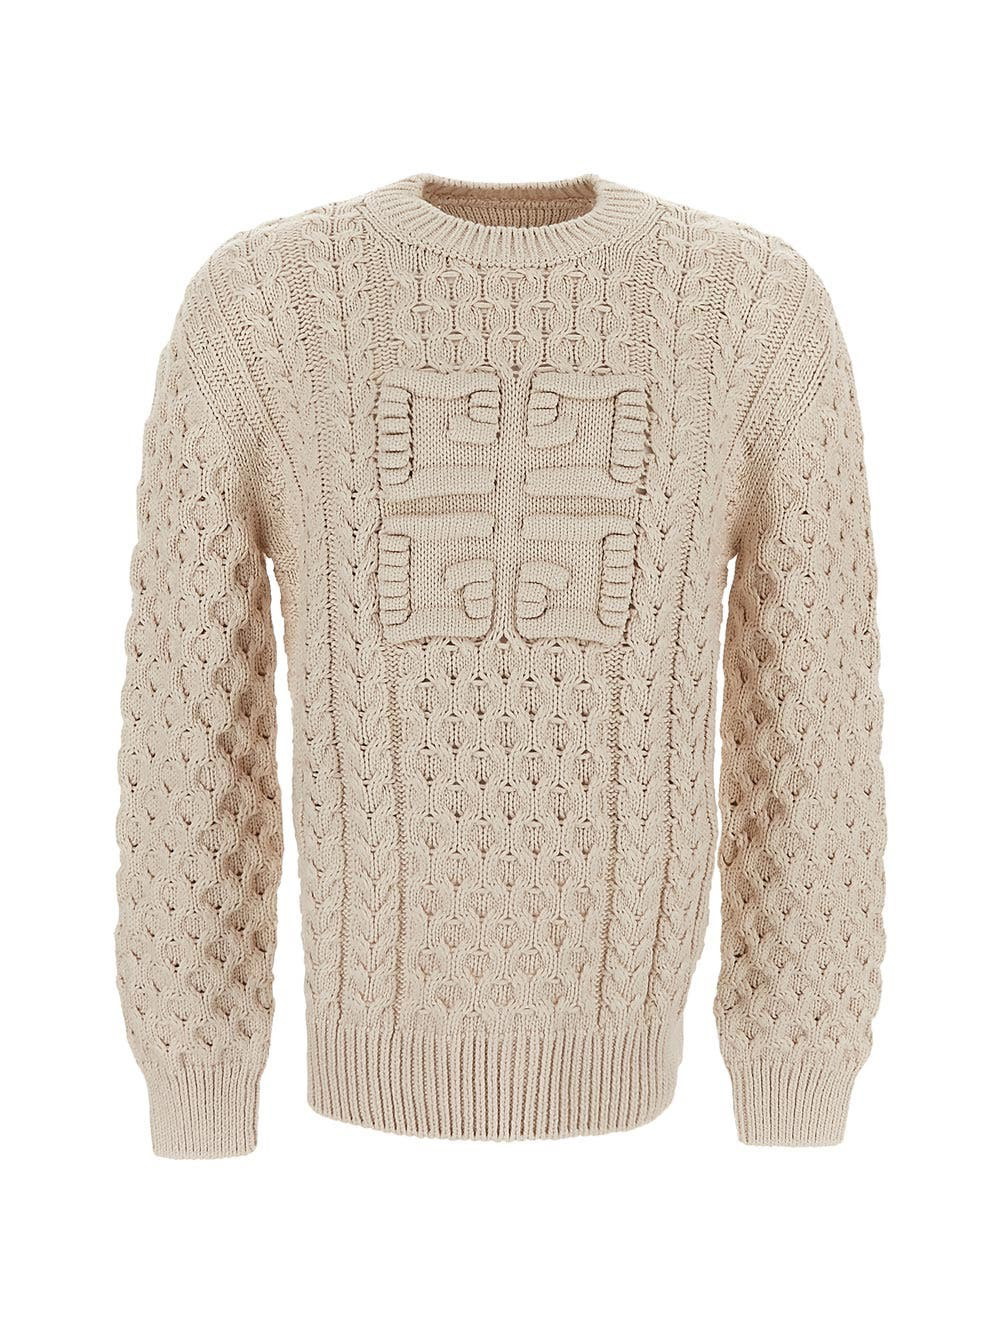 Photo: Givenchy Cotton Knitwear